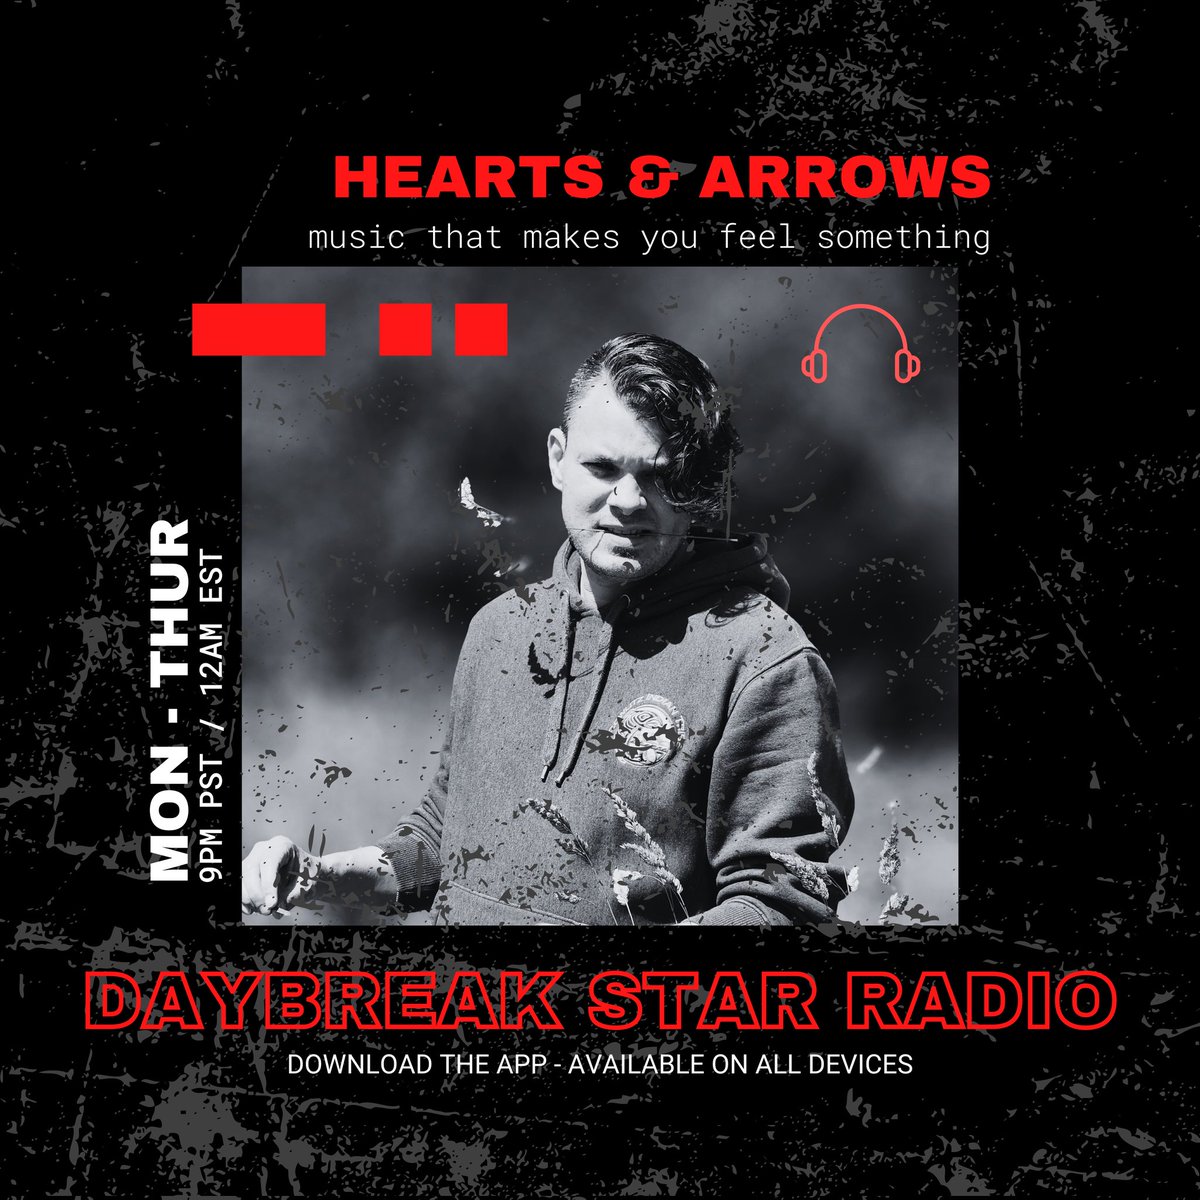 The week is just getting started! Like every Mon-Thur at 9pm PST/12am EST join me for #HeartsandArrows & music that makes you feel something.
Only on @DaybreakRadio
Call or text 919-NATIVES with your dedications, shout outs, & song requests.
#indigenousmusic #nativeamericanmusic